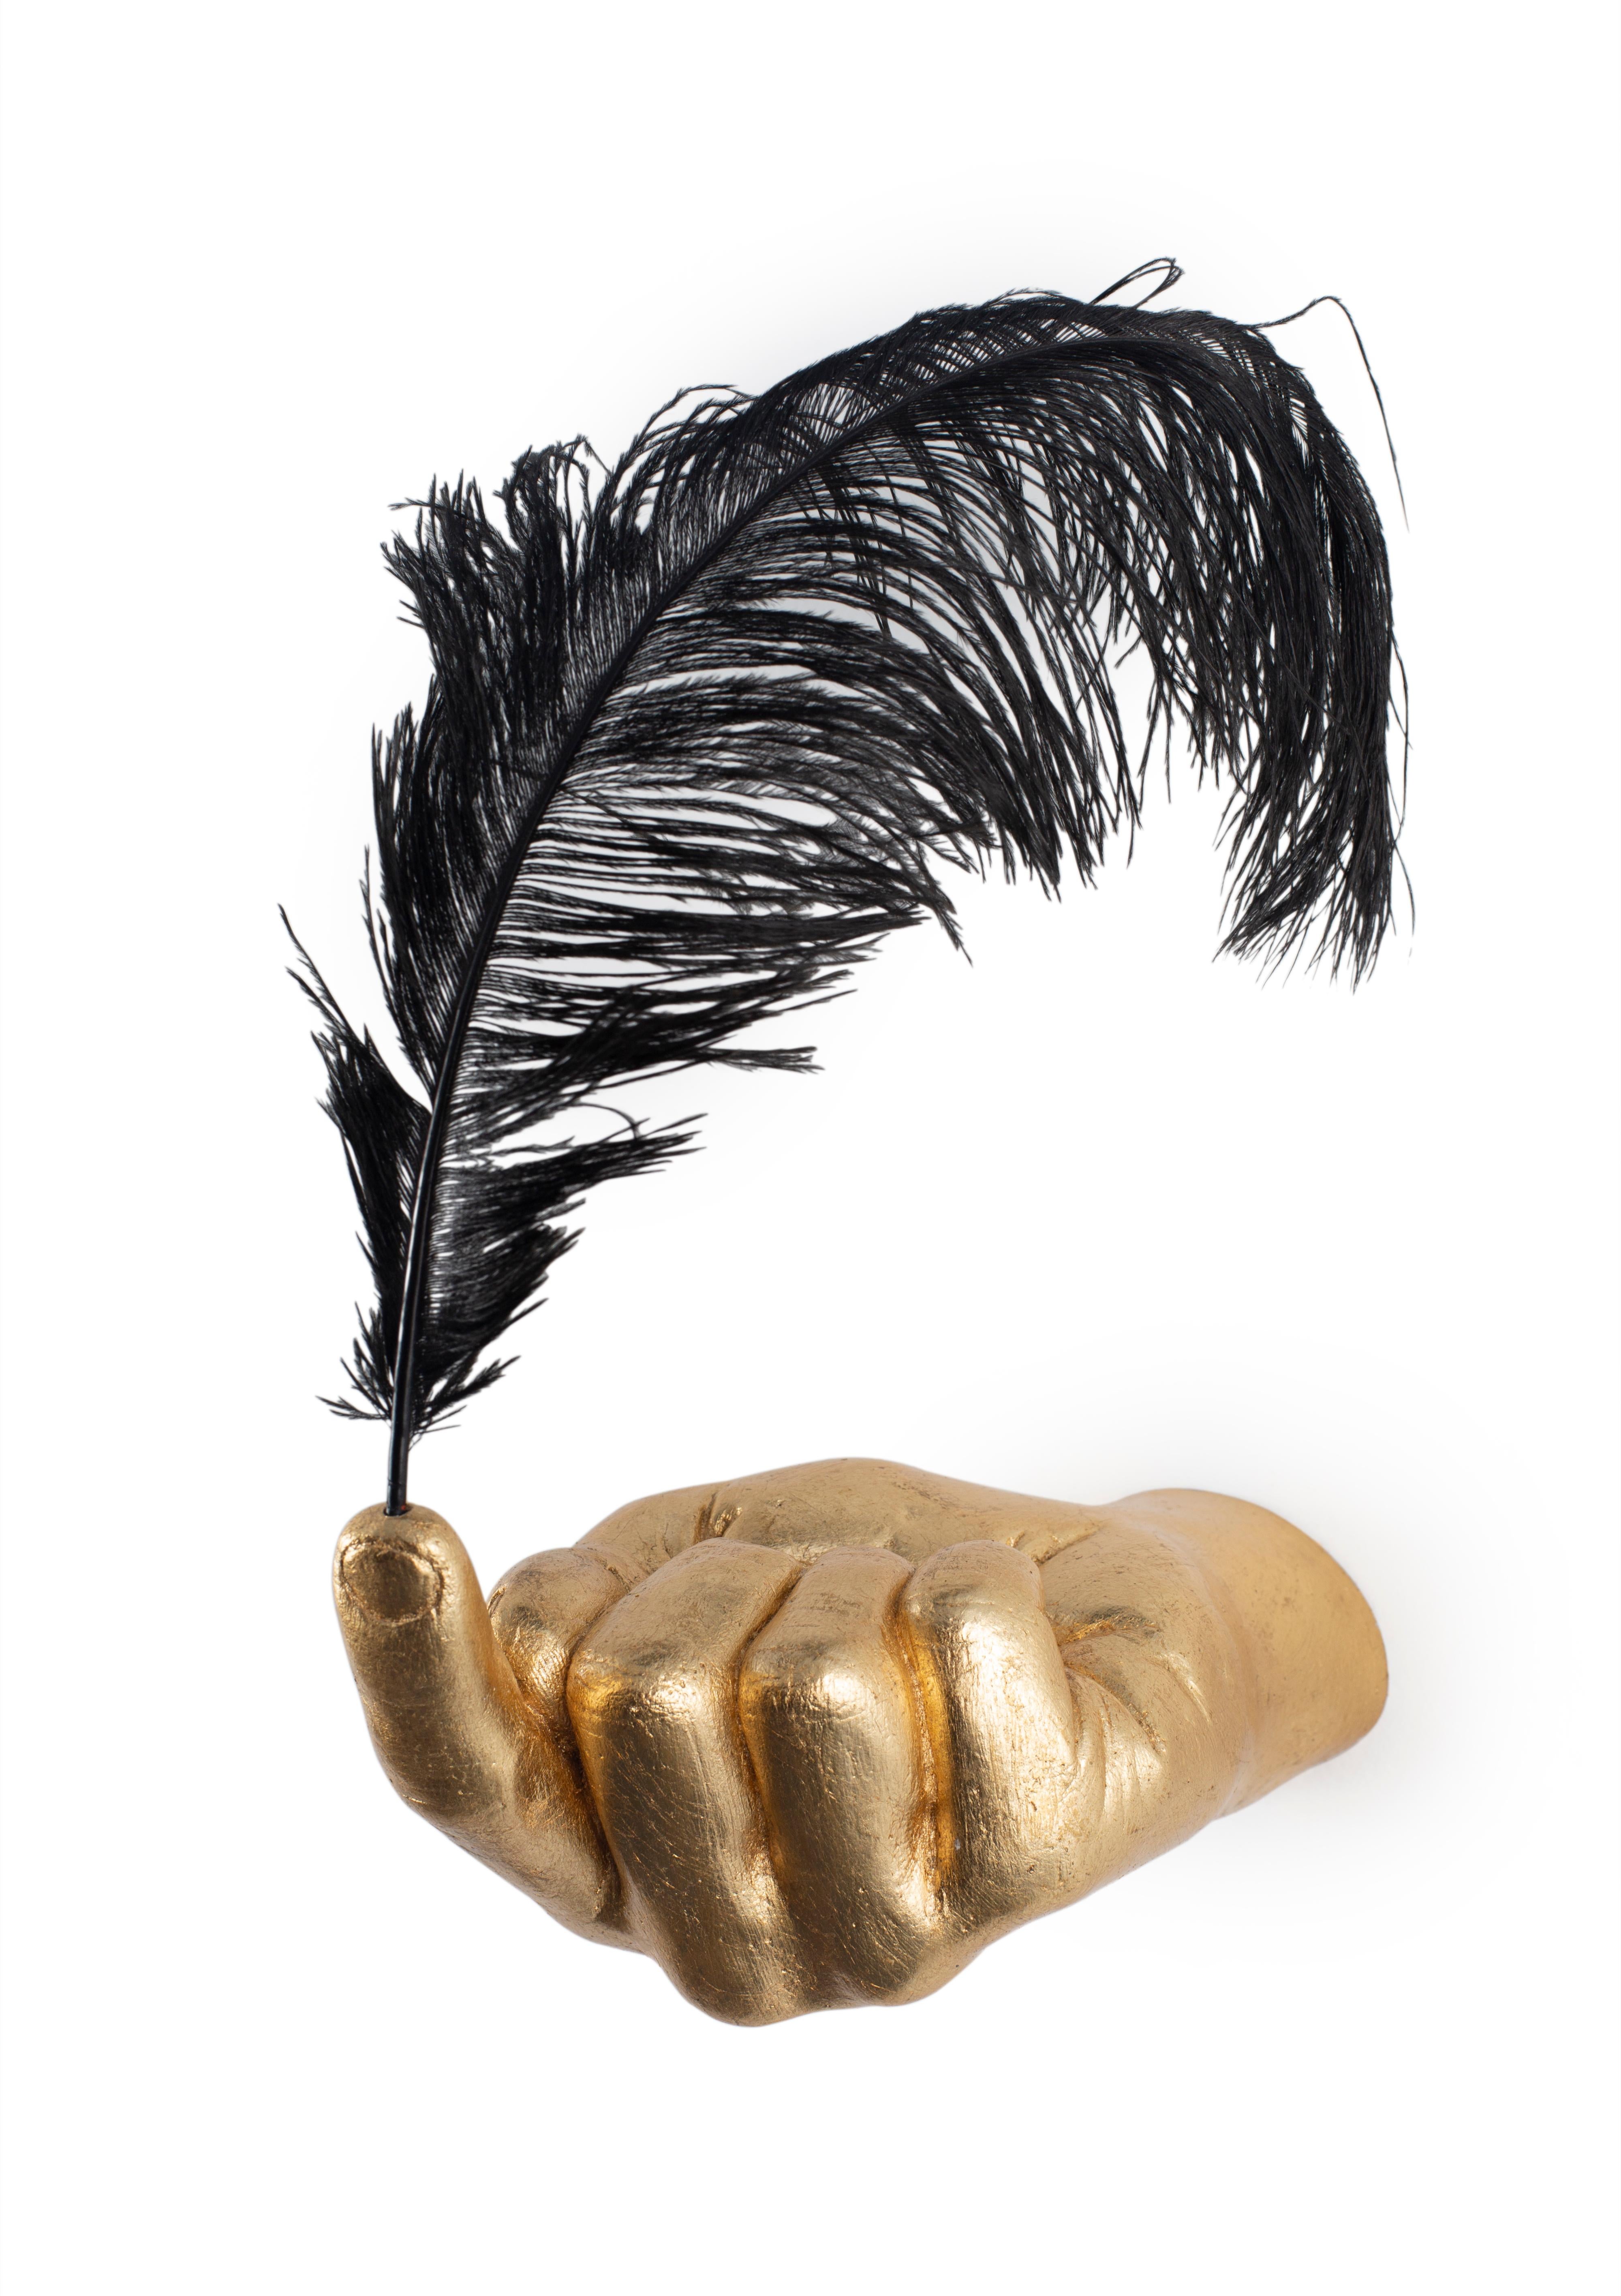 Mattia Novello Abstract Sculpture - 'The Weight of Man in Olympus' Conceptual Hand Wall Sculpture, Gold and Black